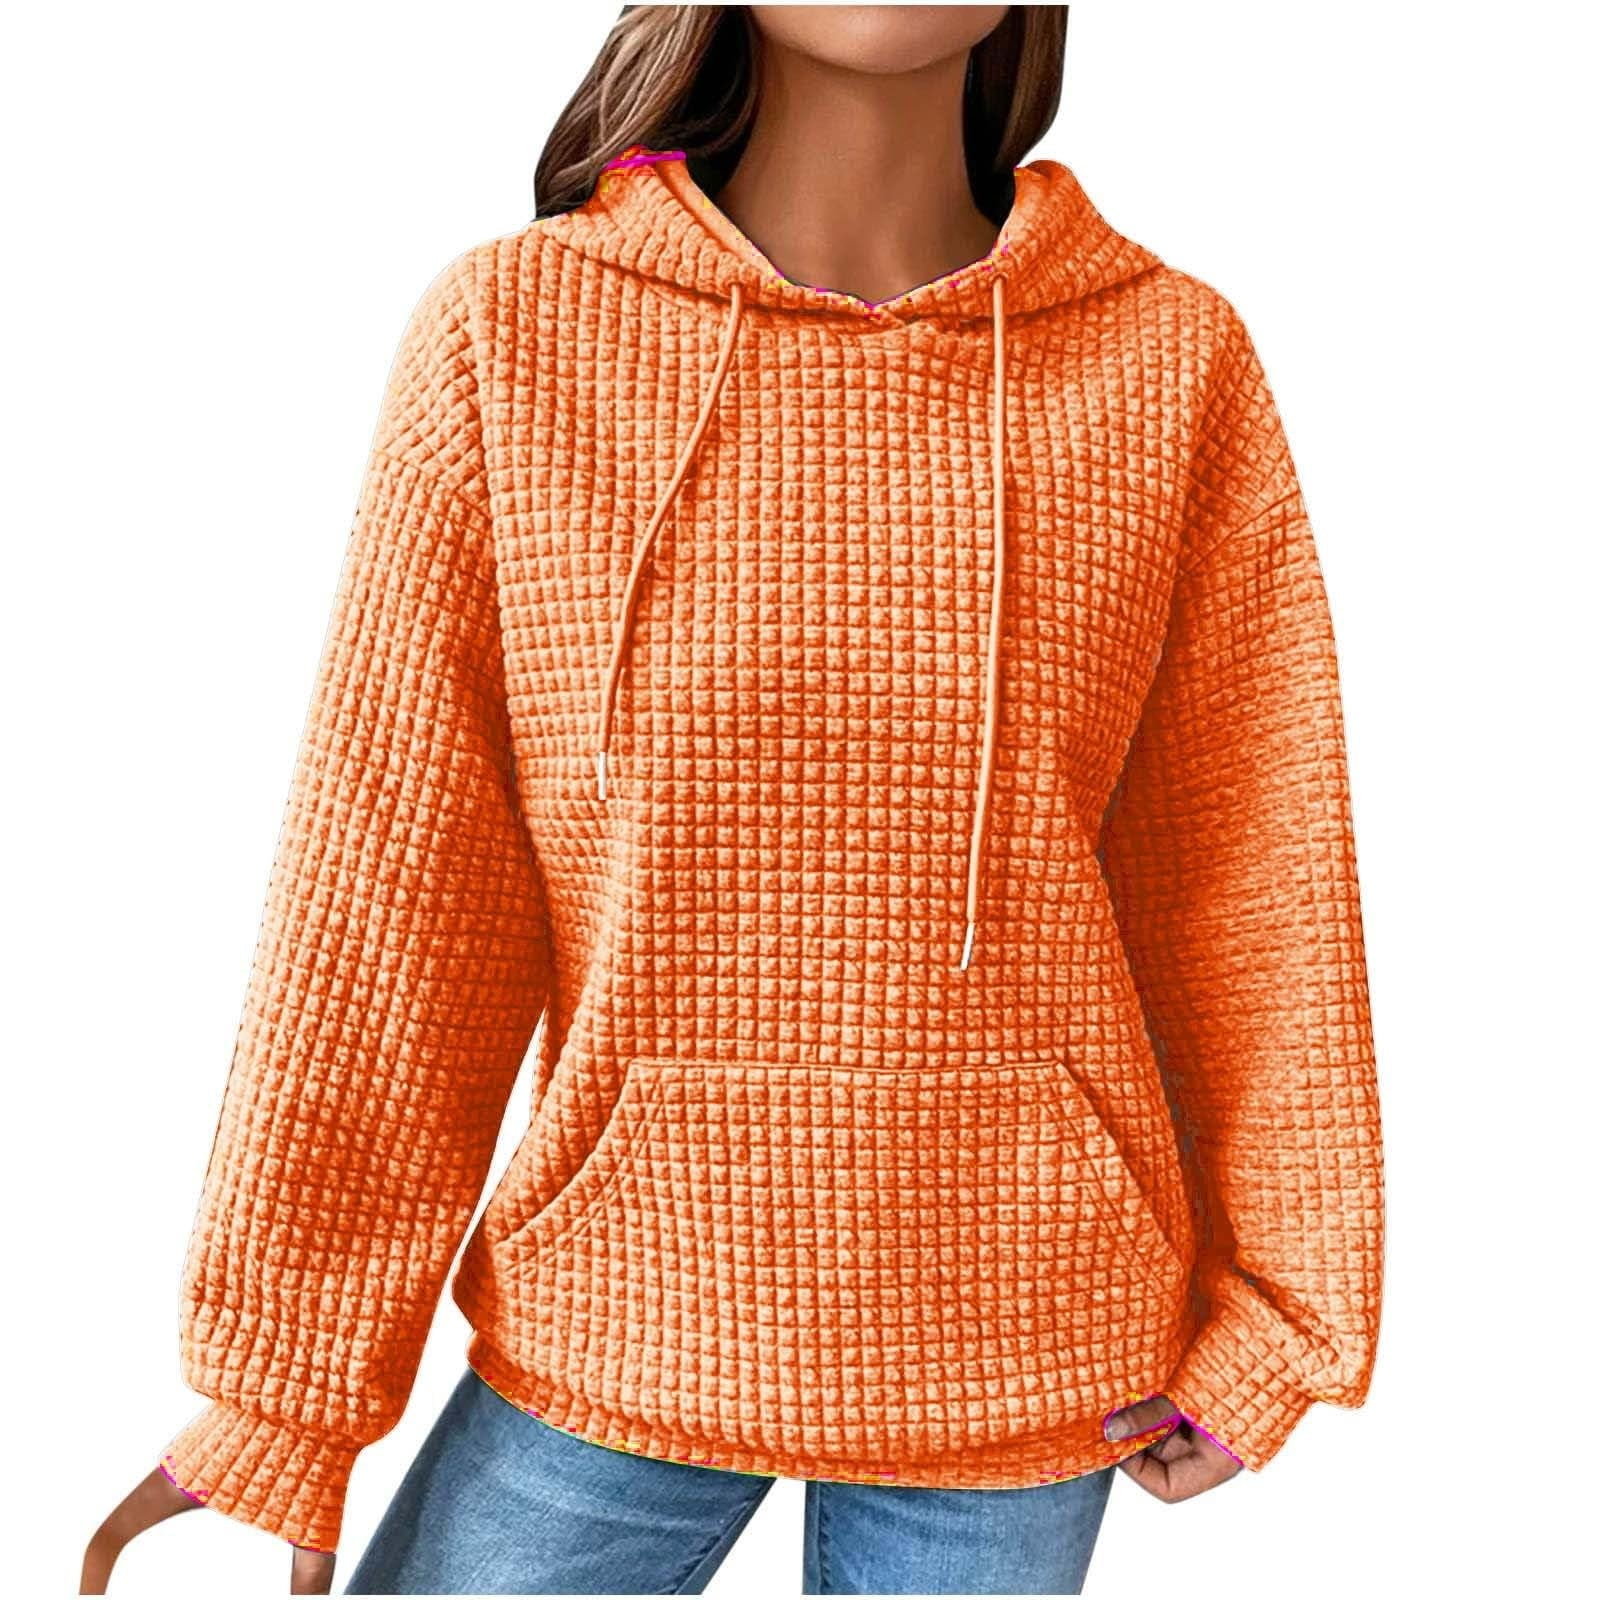 Mlqidk Waffle Knit Plain Casual Hoodie Sweatshirt with Pocket Fall Fashion  Tops for Women Comfy Color Lightweight Outfits Orange M